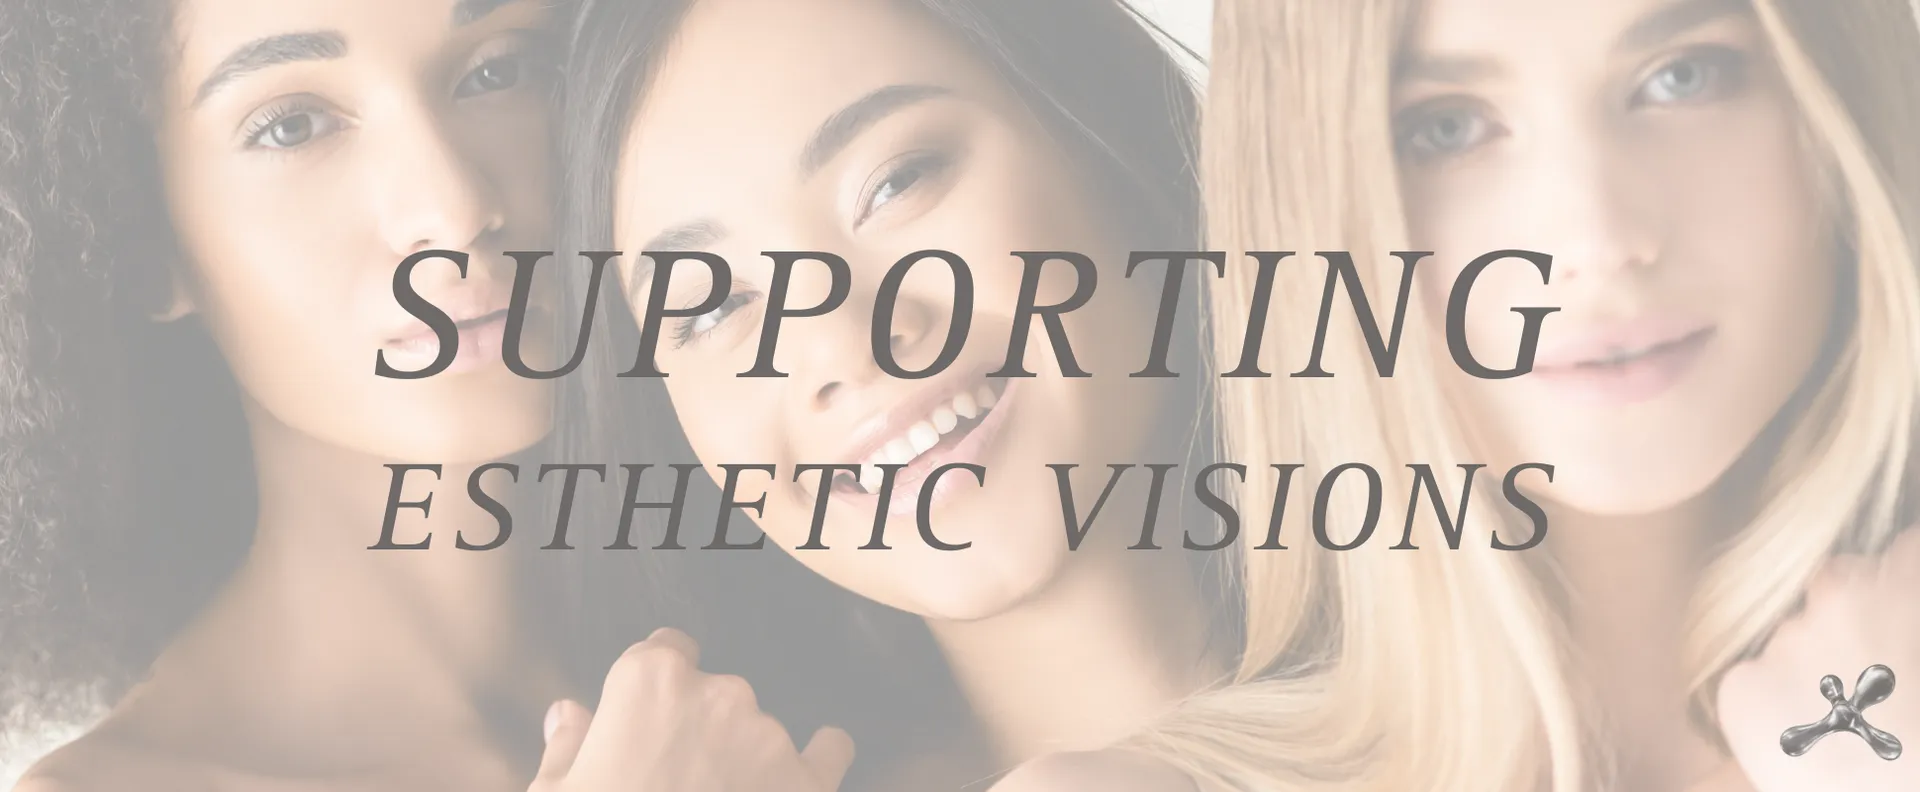 Naturelize - Supporting esthetic visions banner